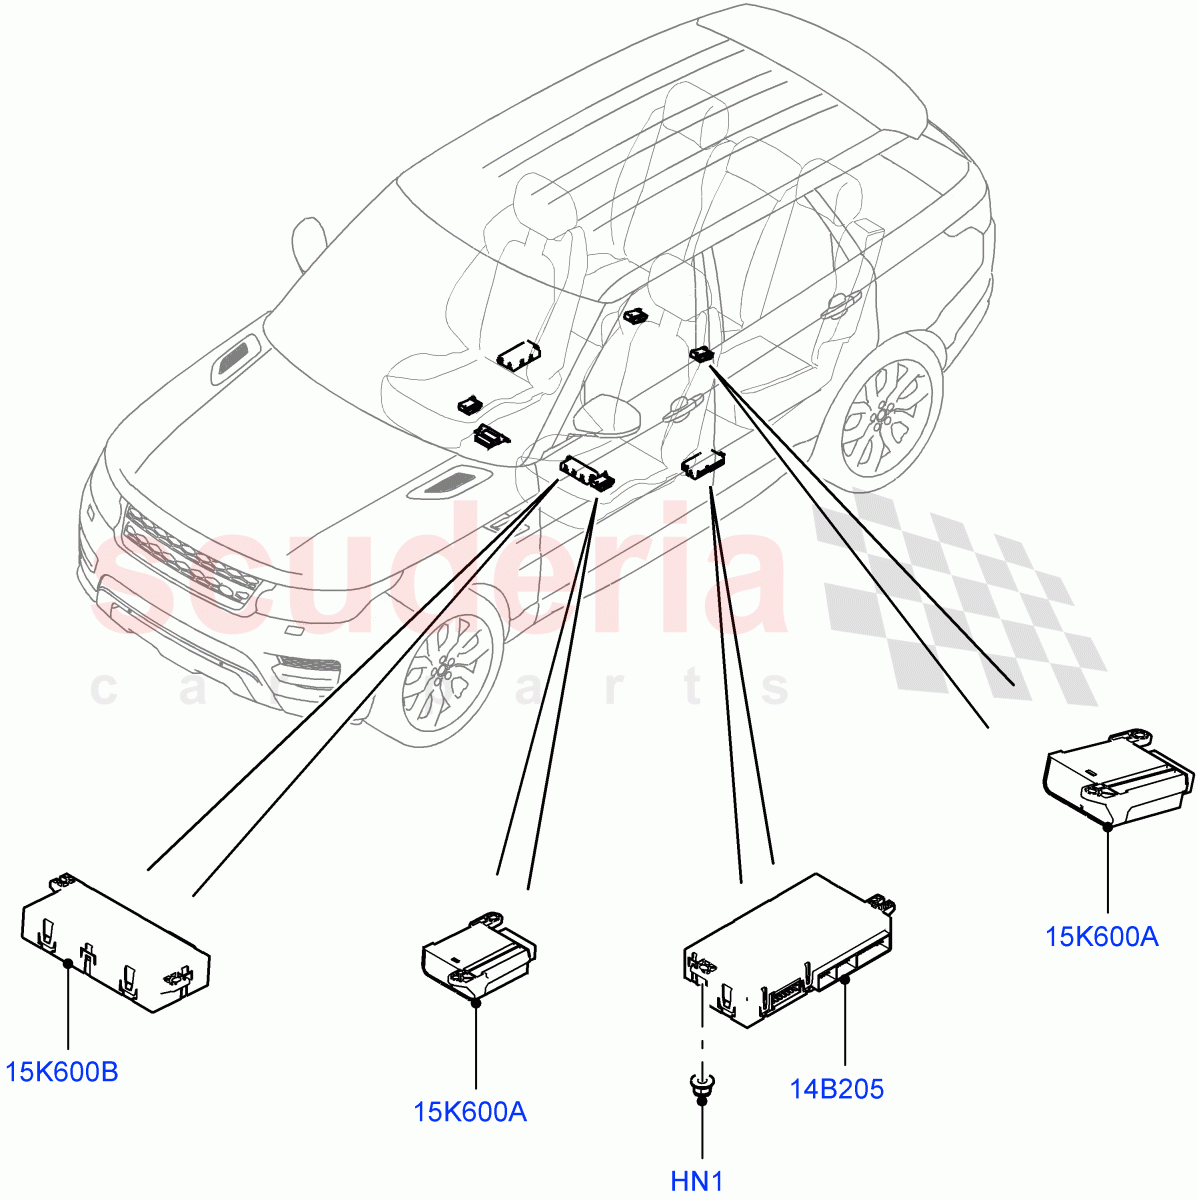 Vehicle Modules And Sensors(Seats) of Land Rover Land Rover Range Rover Sport (2014+) [2.0 Turbo Diesel]